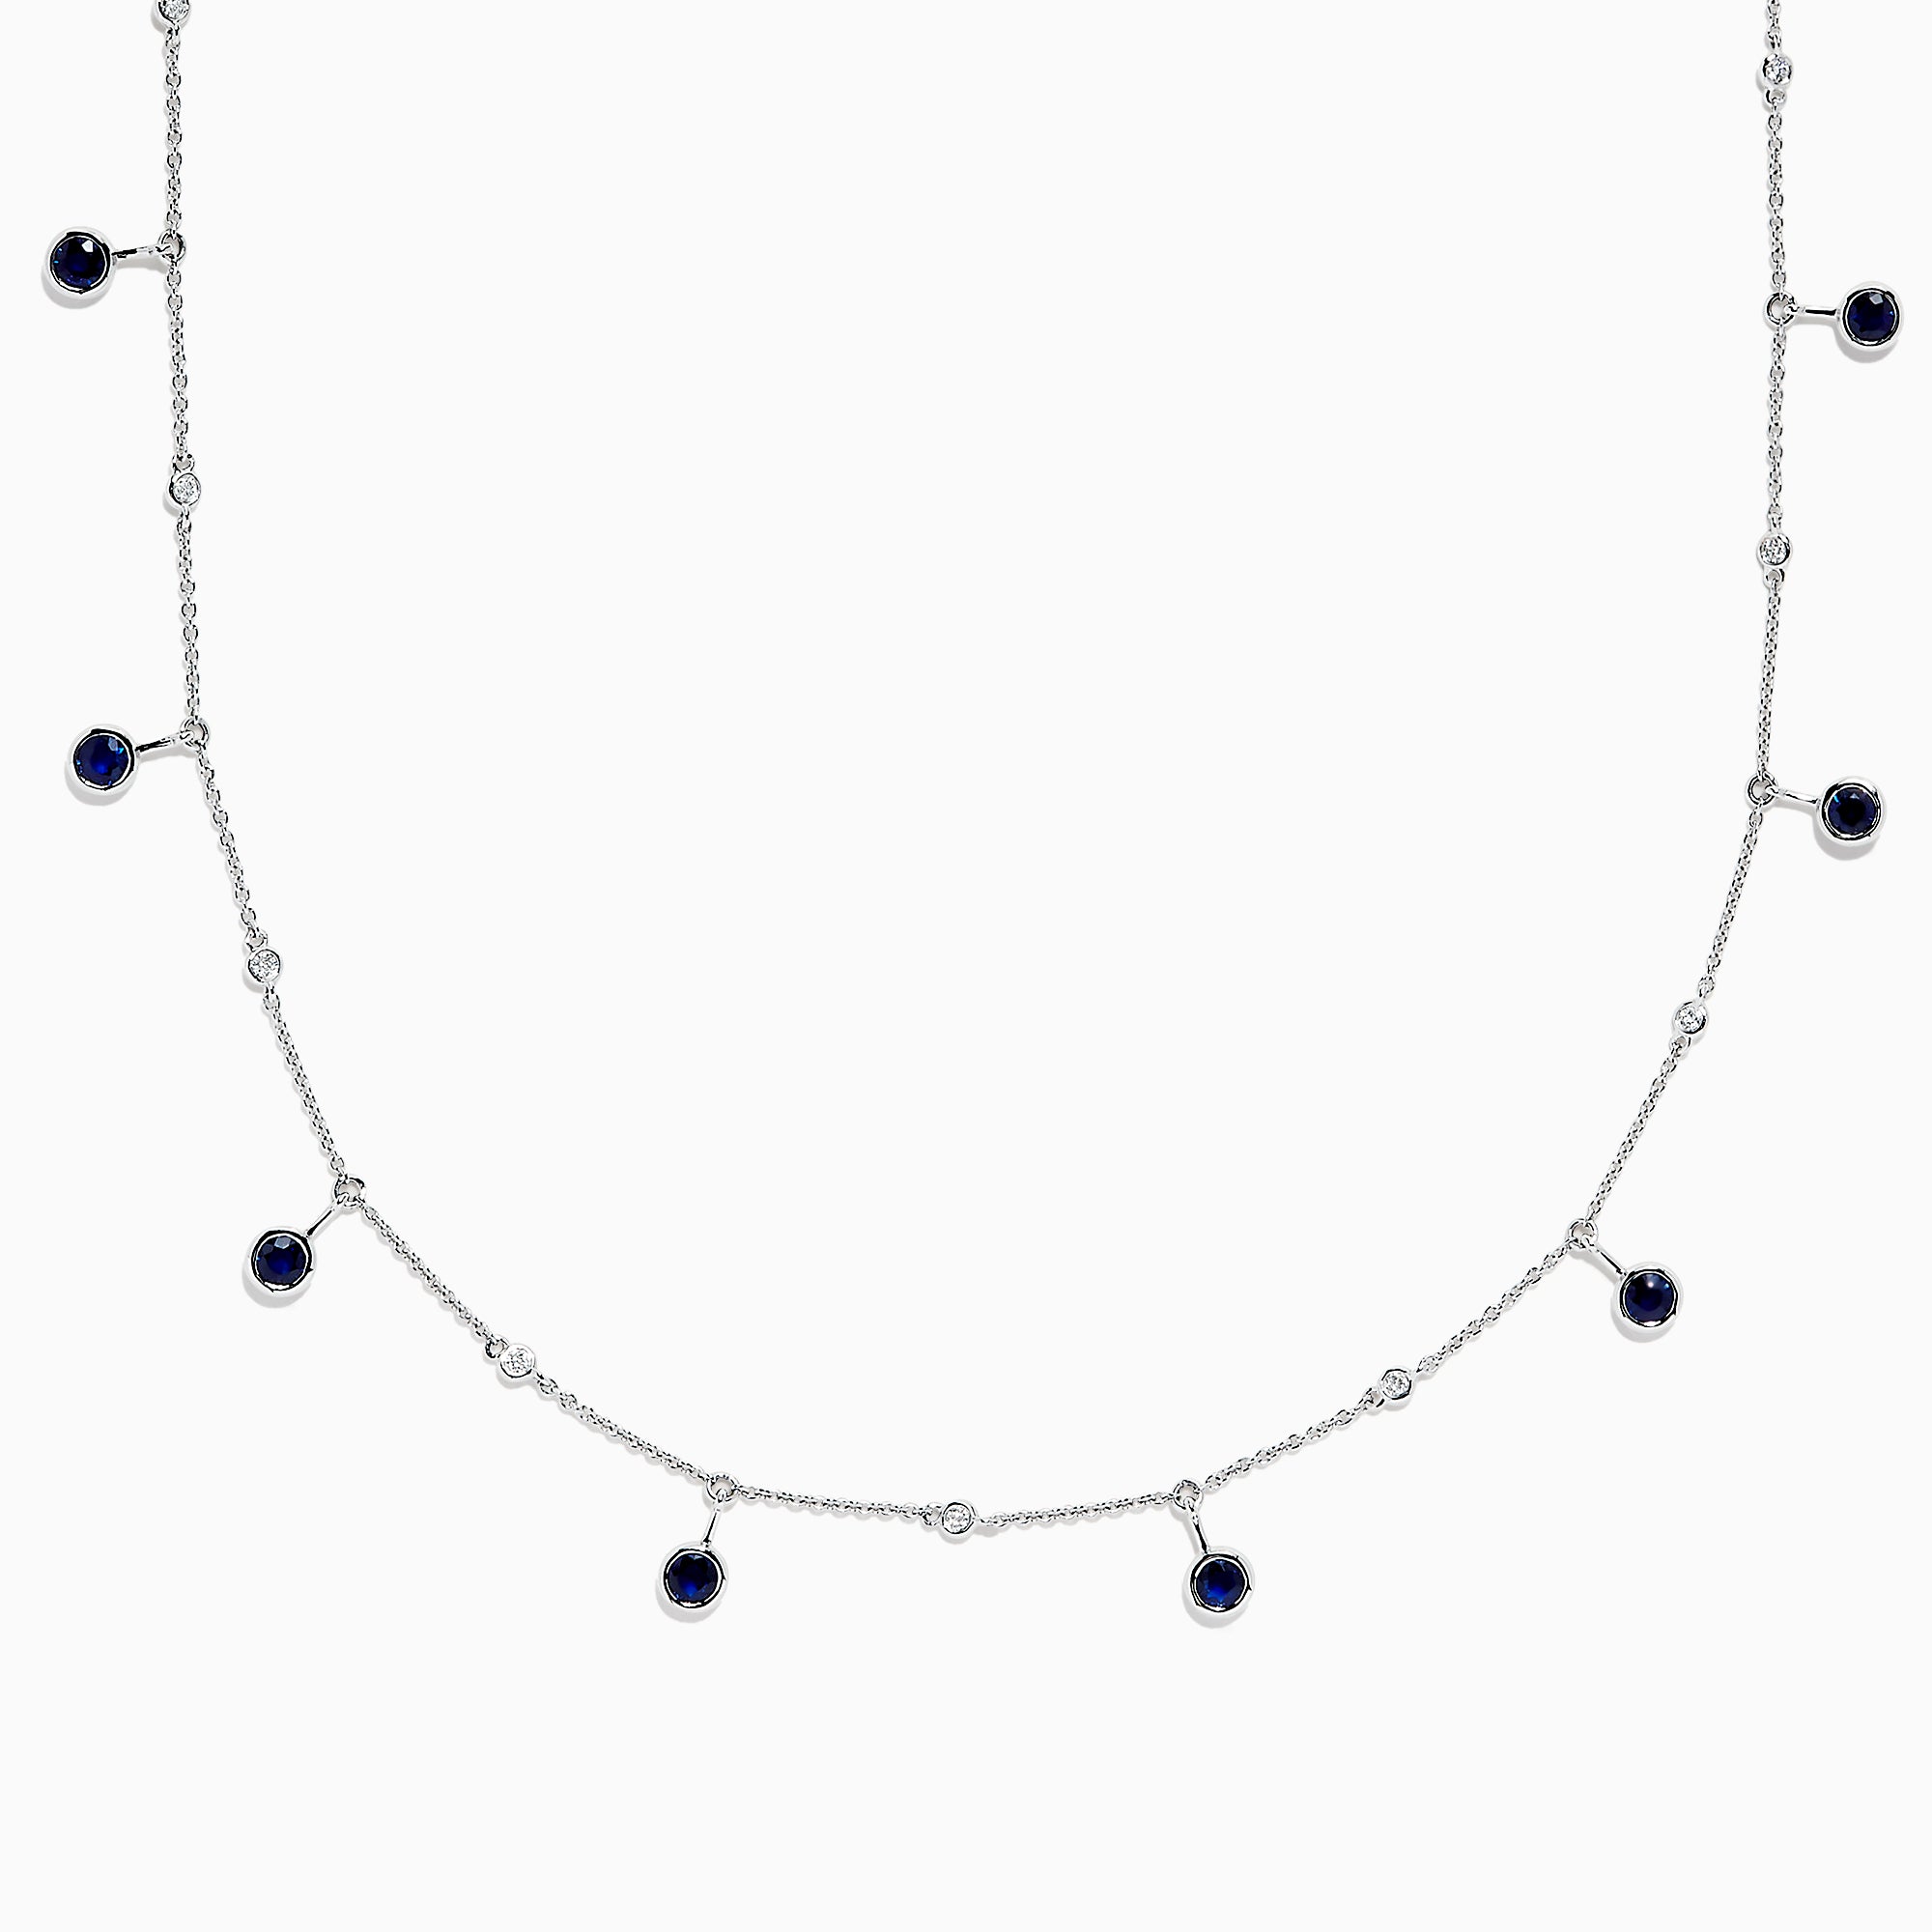 Effy 14K White Gold Sapphire and Diamond Station Necklace, 1.65 TCW